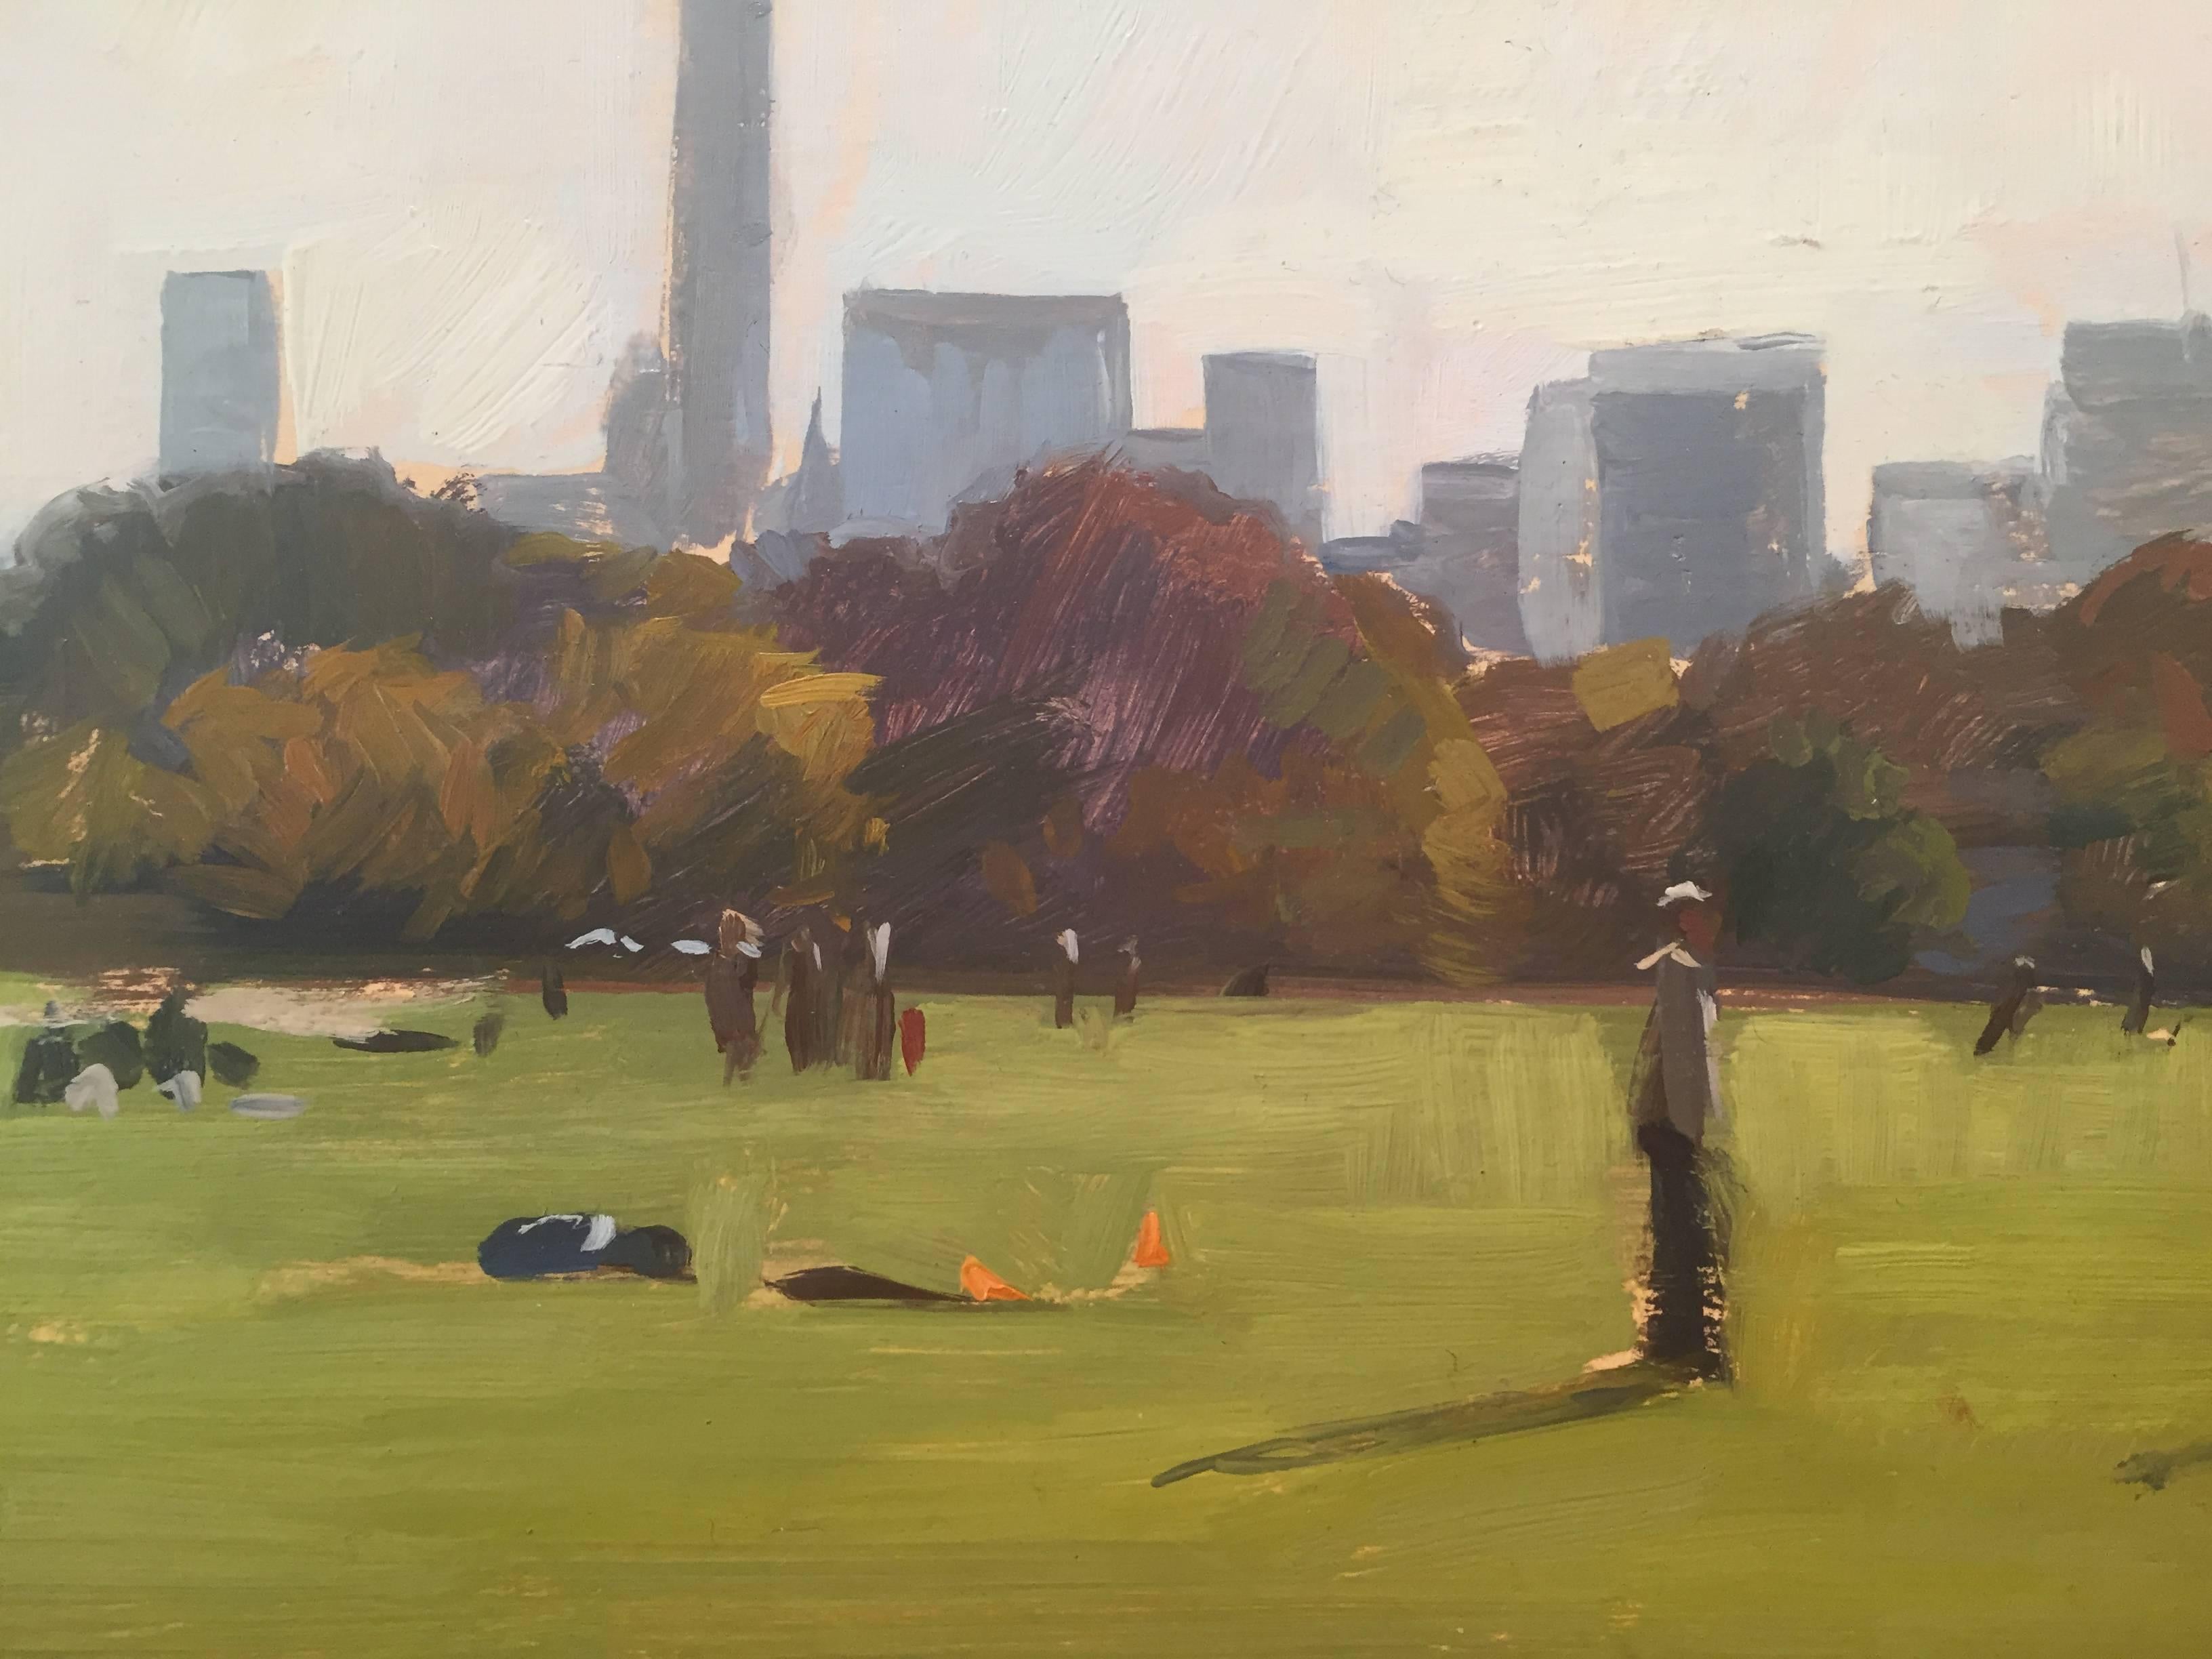 Painted en plein air in Central Park, in New York City. A large grassy field painted with a bright green, meets a tree lined horizon in autumnal colors. The skyline stands against a lavender sky. Figures scattered throughout the green expanse,